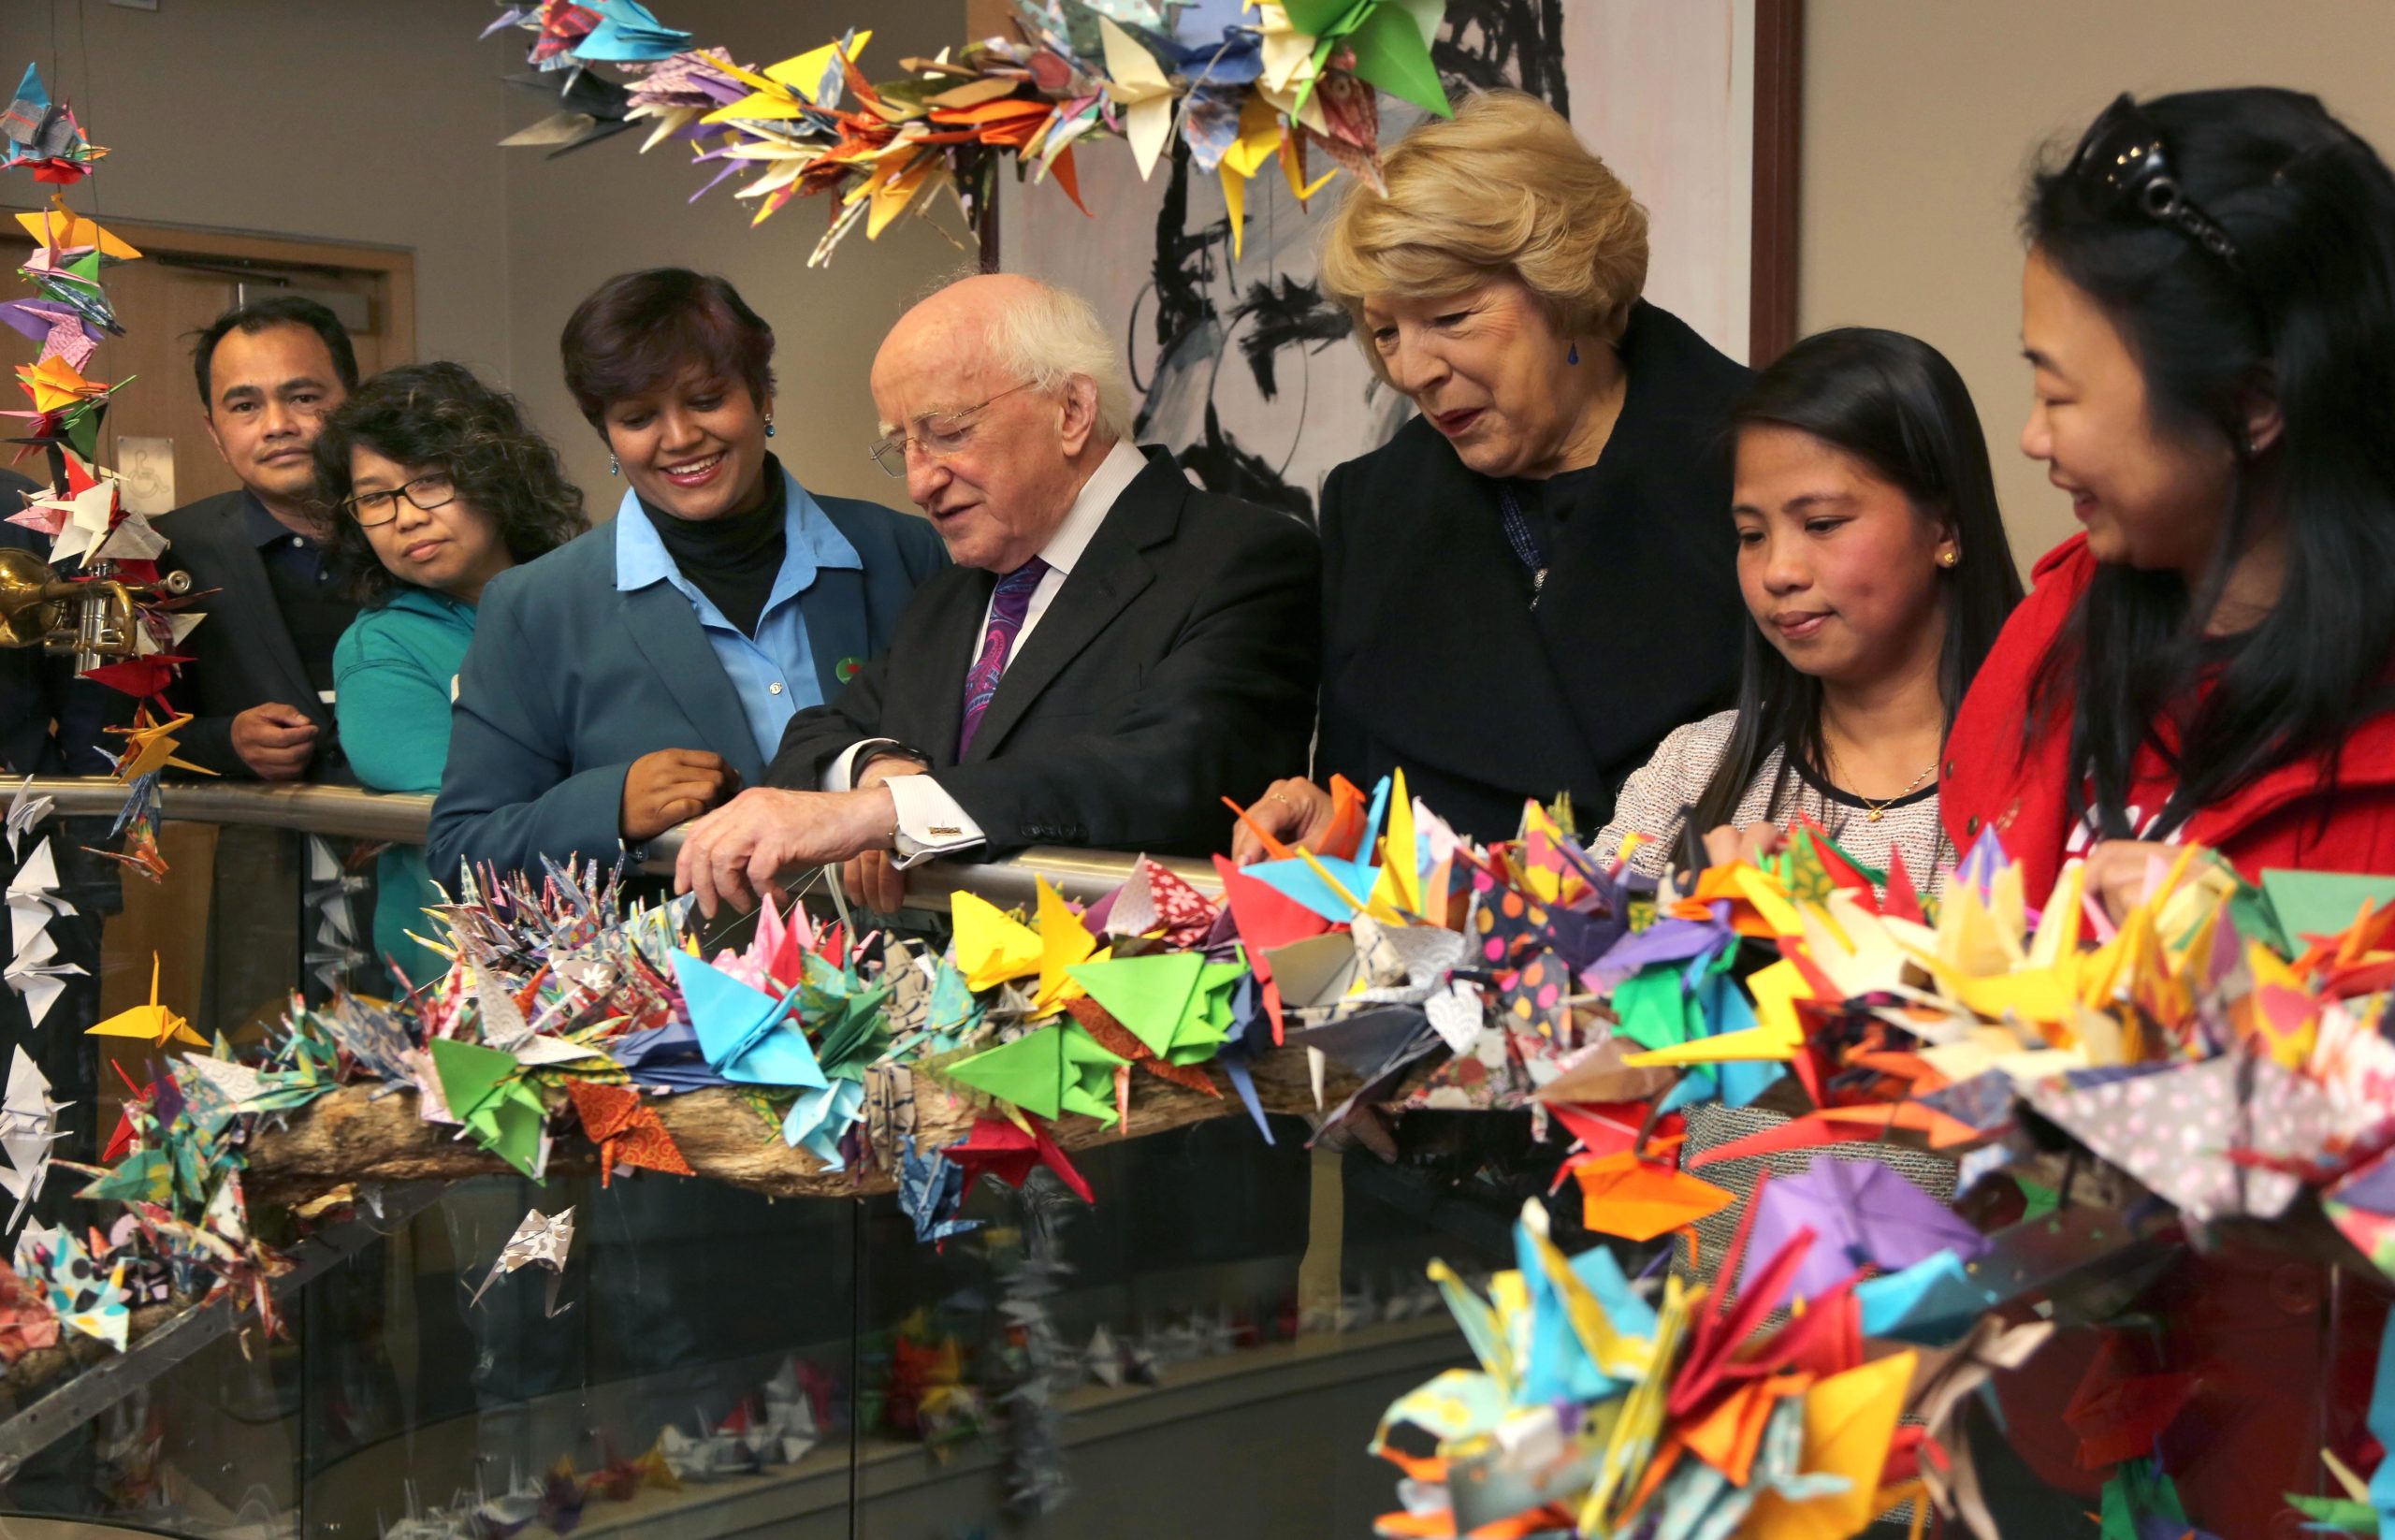 President Higgins visits art installation created by undocumented migrants